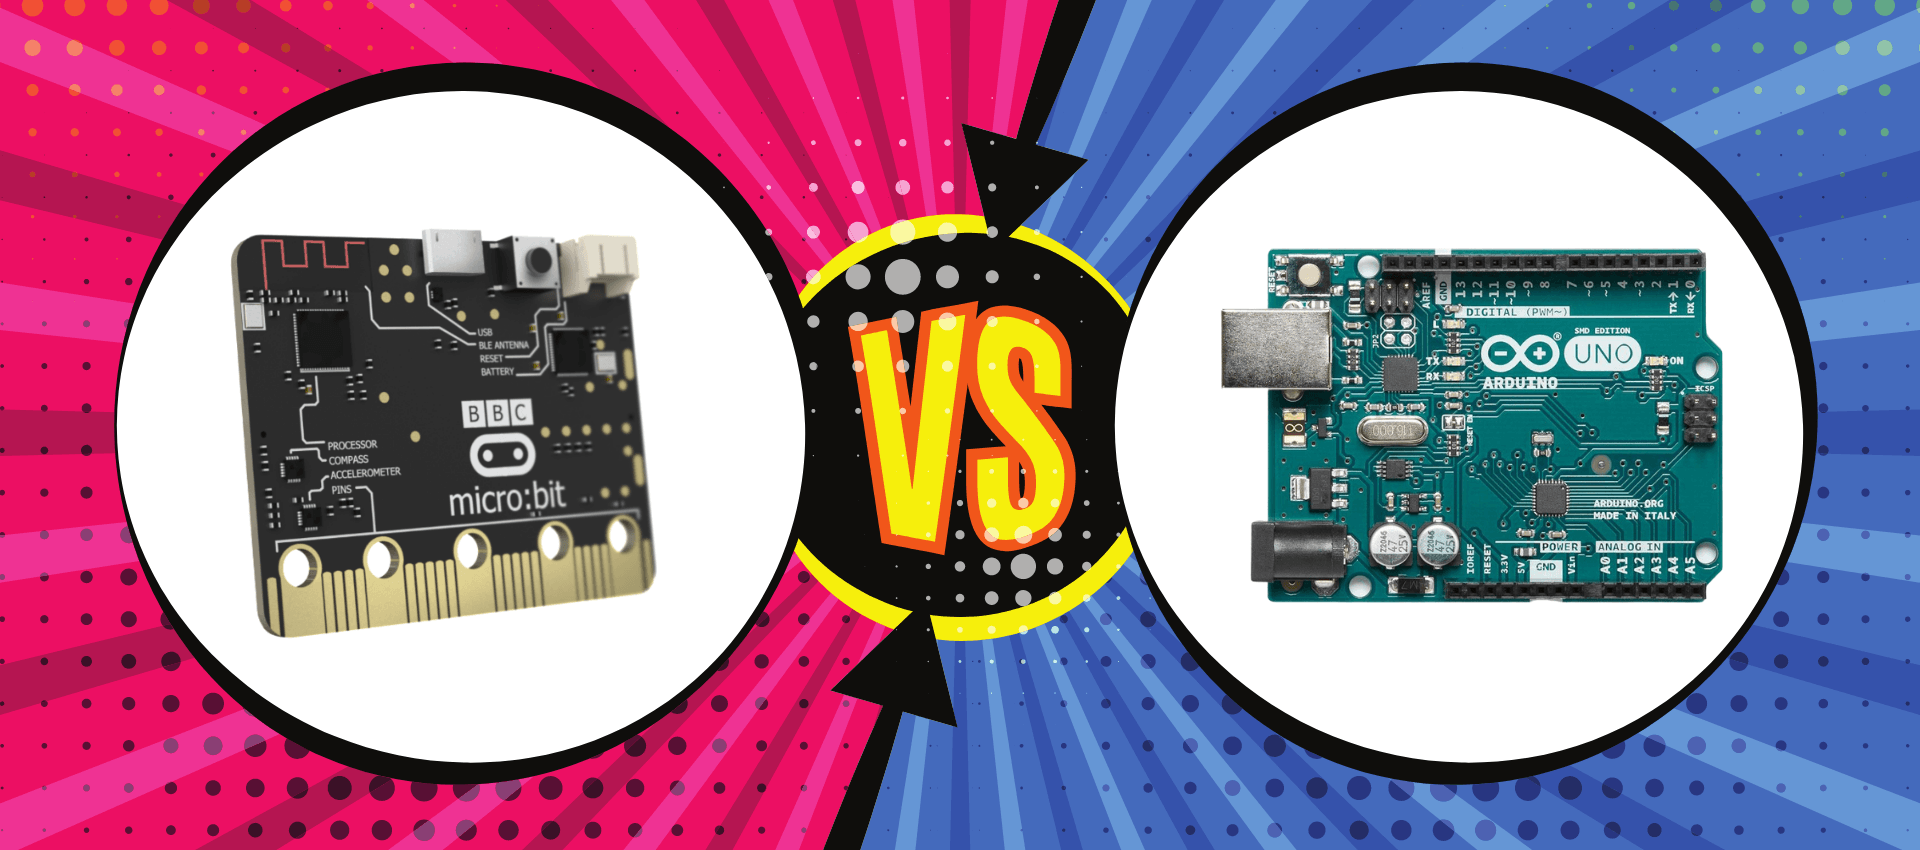 Which is Best For Teaching - BBC Micro:Bit or Arduino?